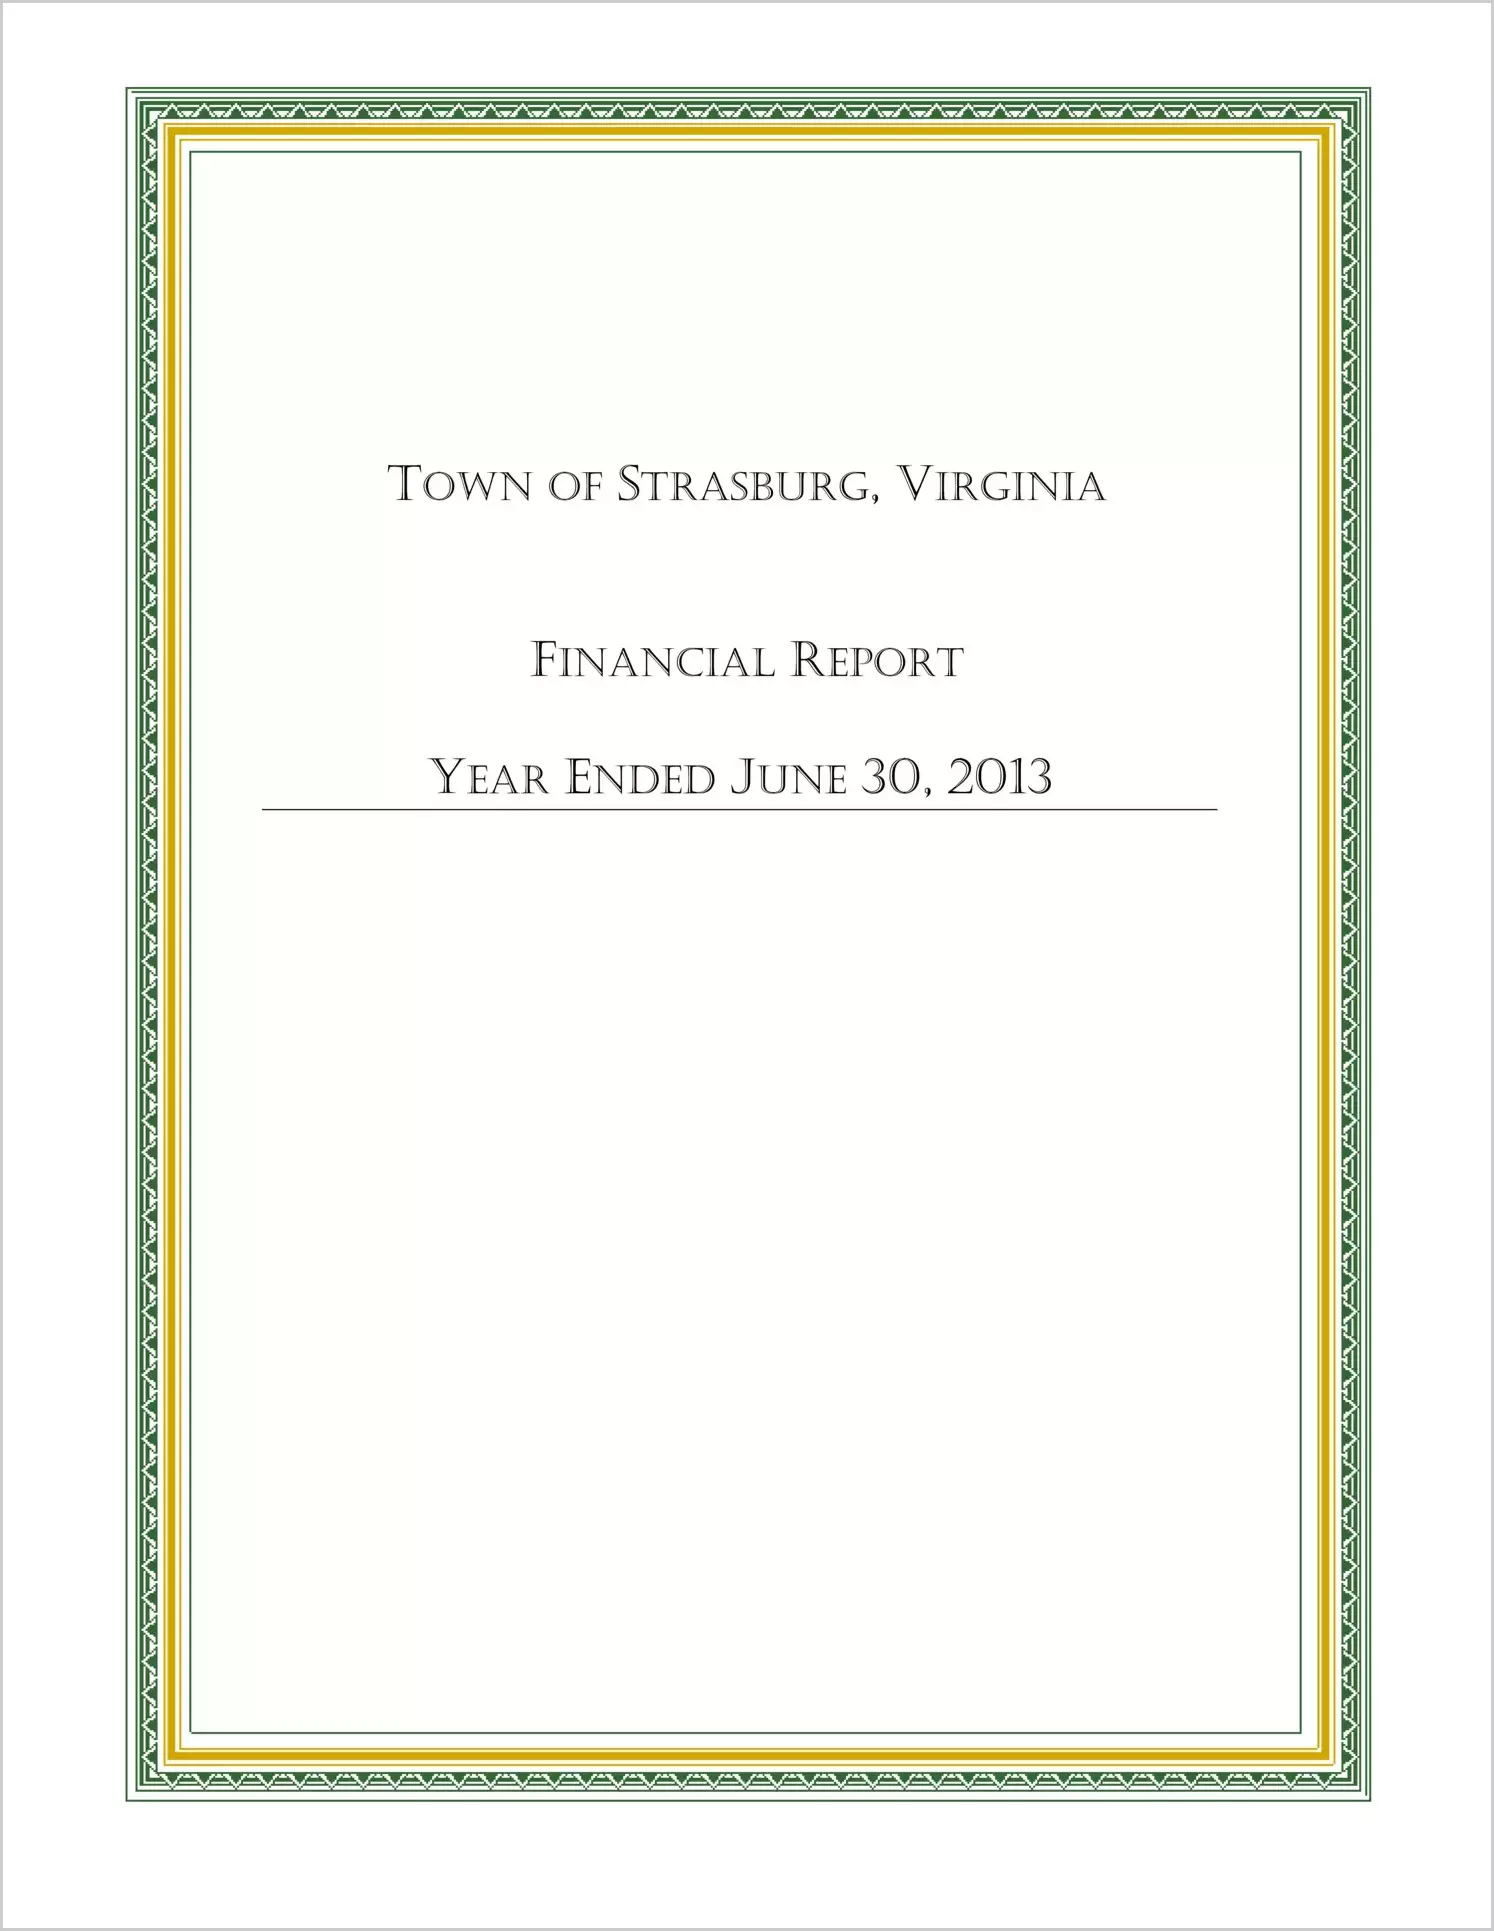 2013 Annual Financial Report for Town of Strasburg